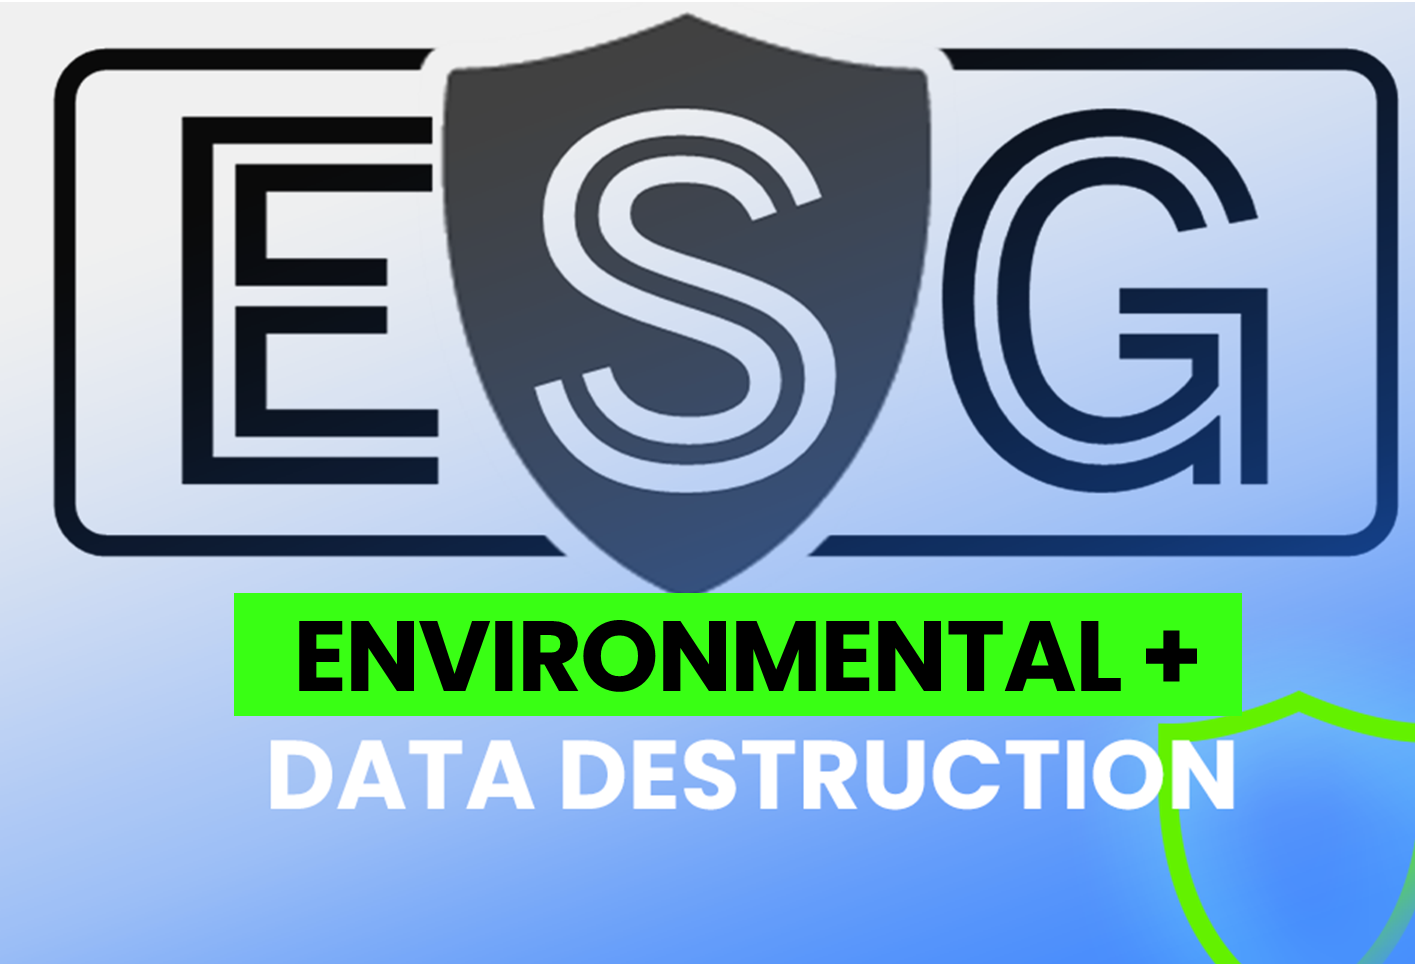 ESG and Electronic Data Destruction: It begins with Environment